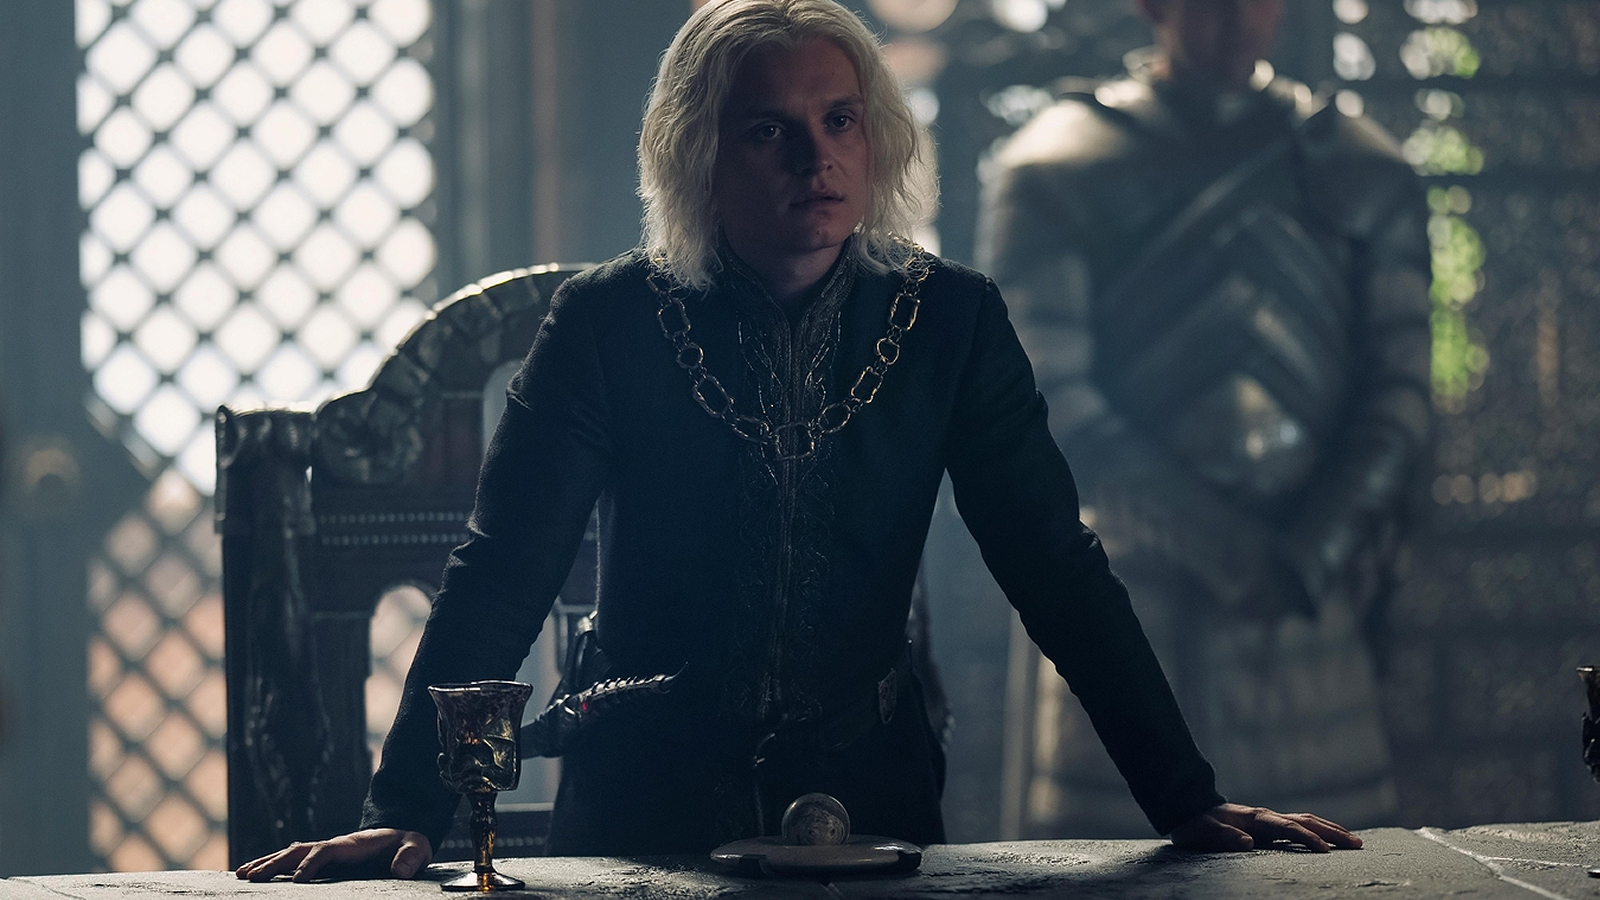 Aegon II Targaryen standing at the Small Council table in House of the Dragon Season 2, Episode 4